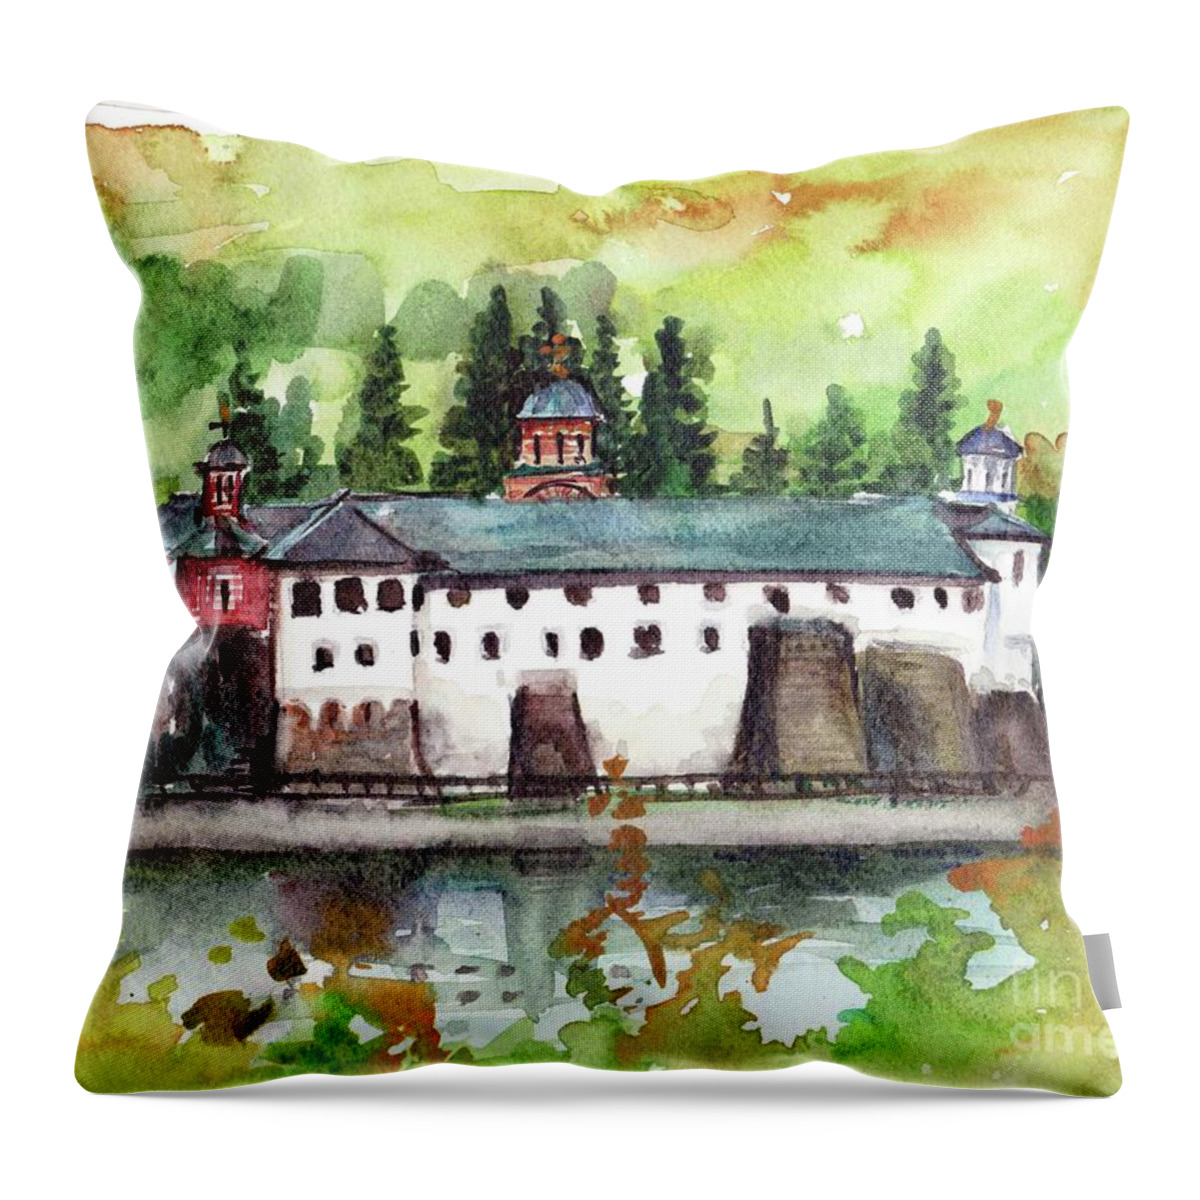 Landscape Throw Pillow featuring the painting By the River by Oana Godeanu